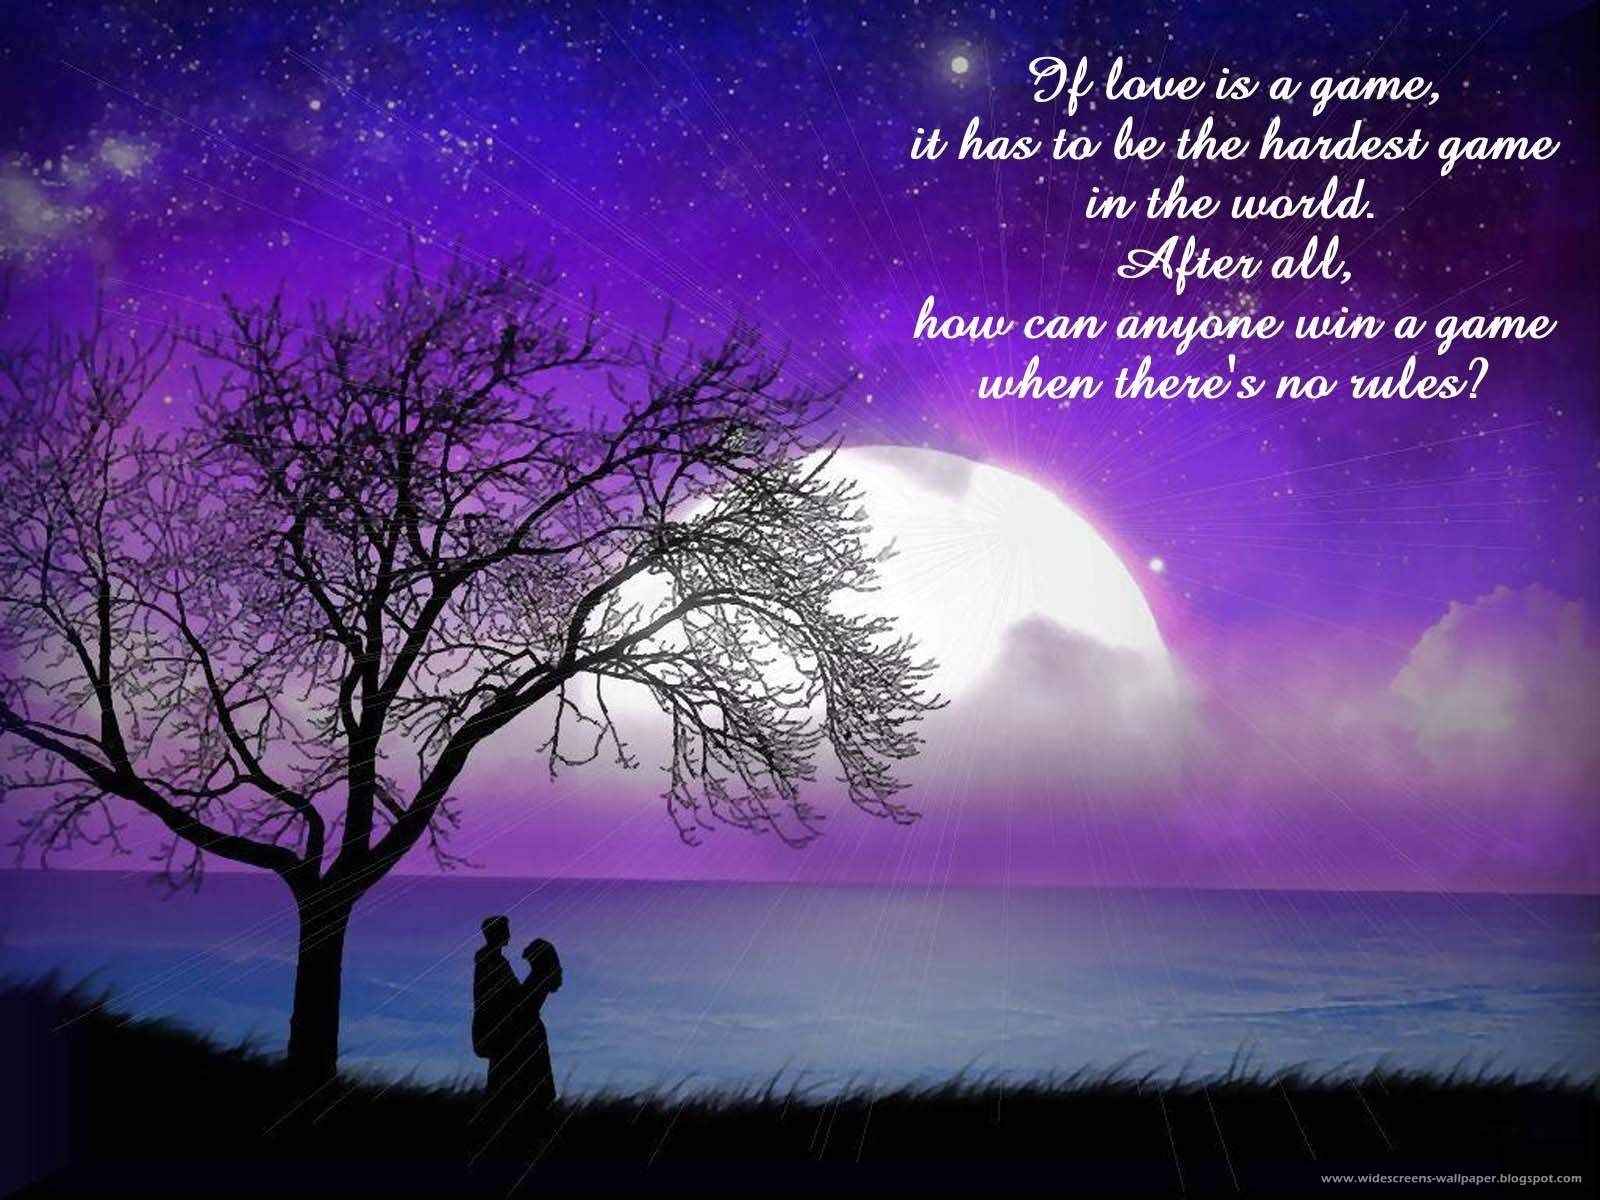 New Romantic Love Words And Quotations Wallpapers Wallpaper 1600x1200